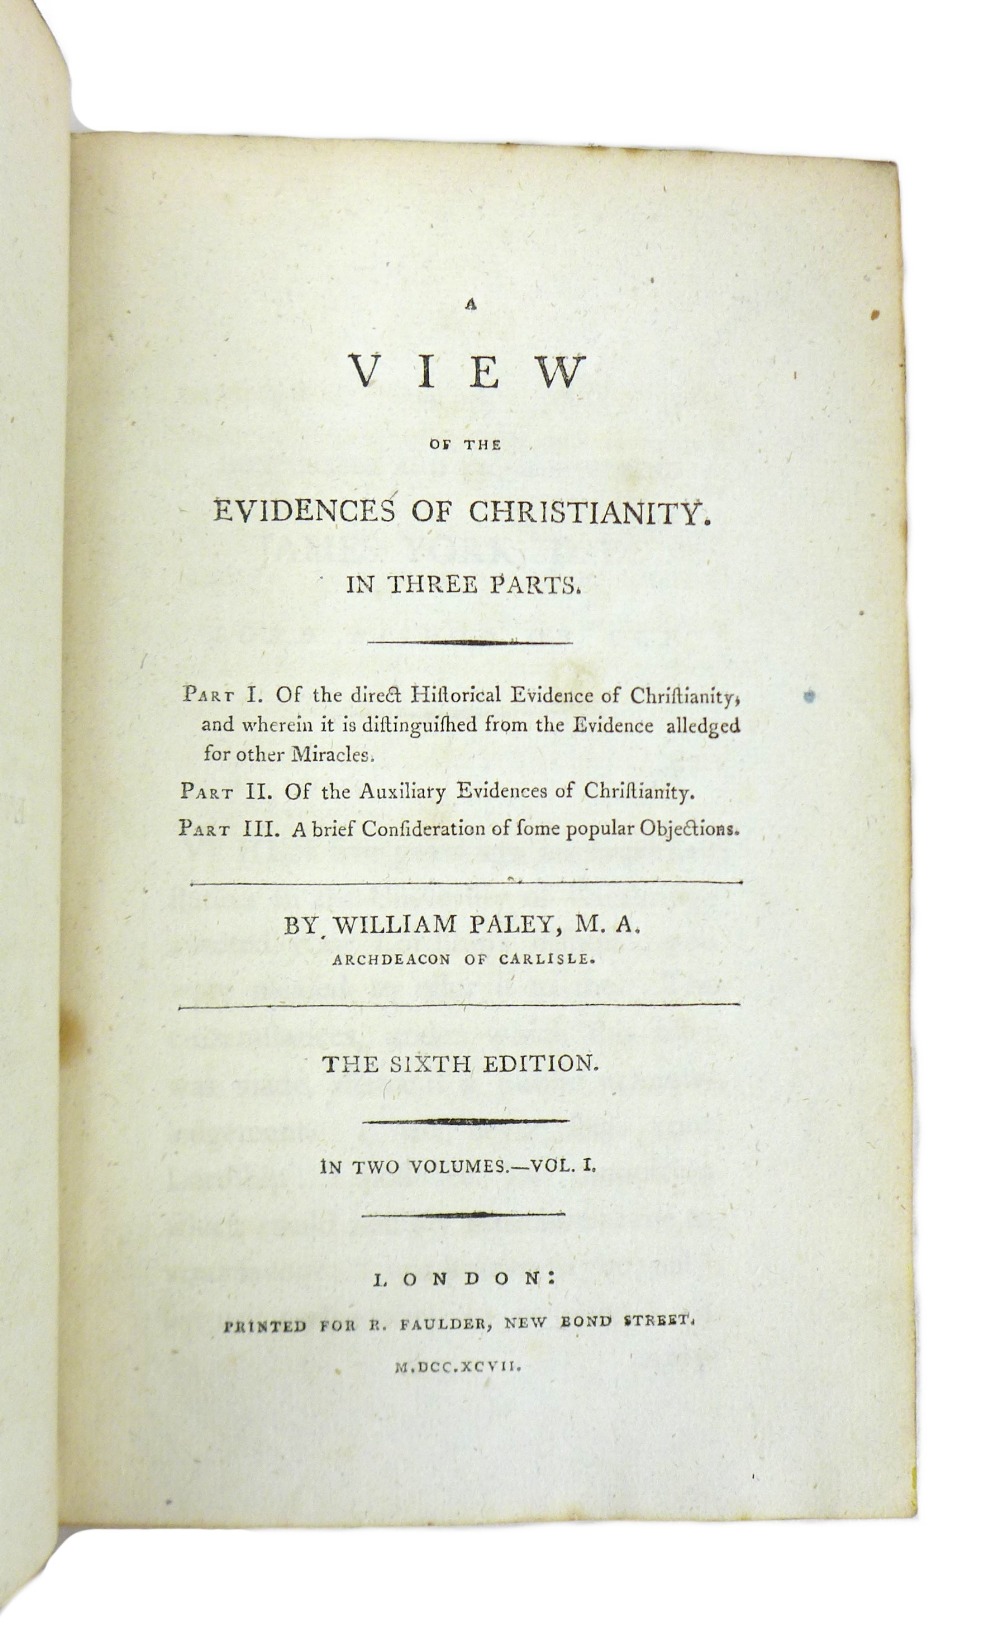 William Paley, Archdeacon of Carlisle: 'A View of the Evidences of Christianity, in Three Parts', in - Image 4 of 6